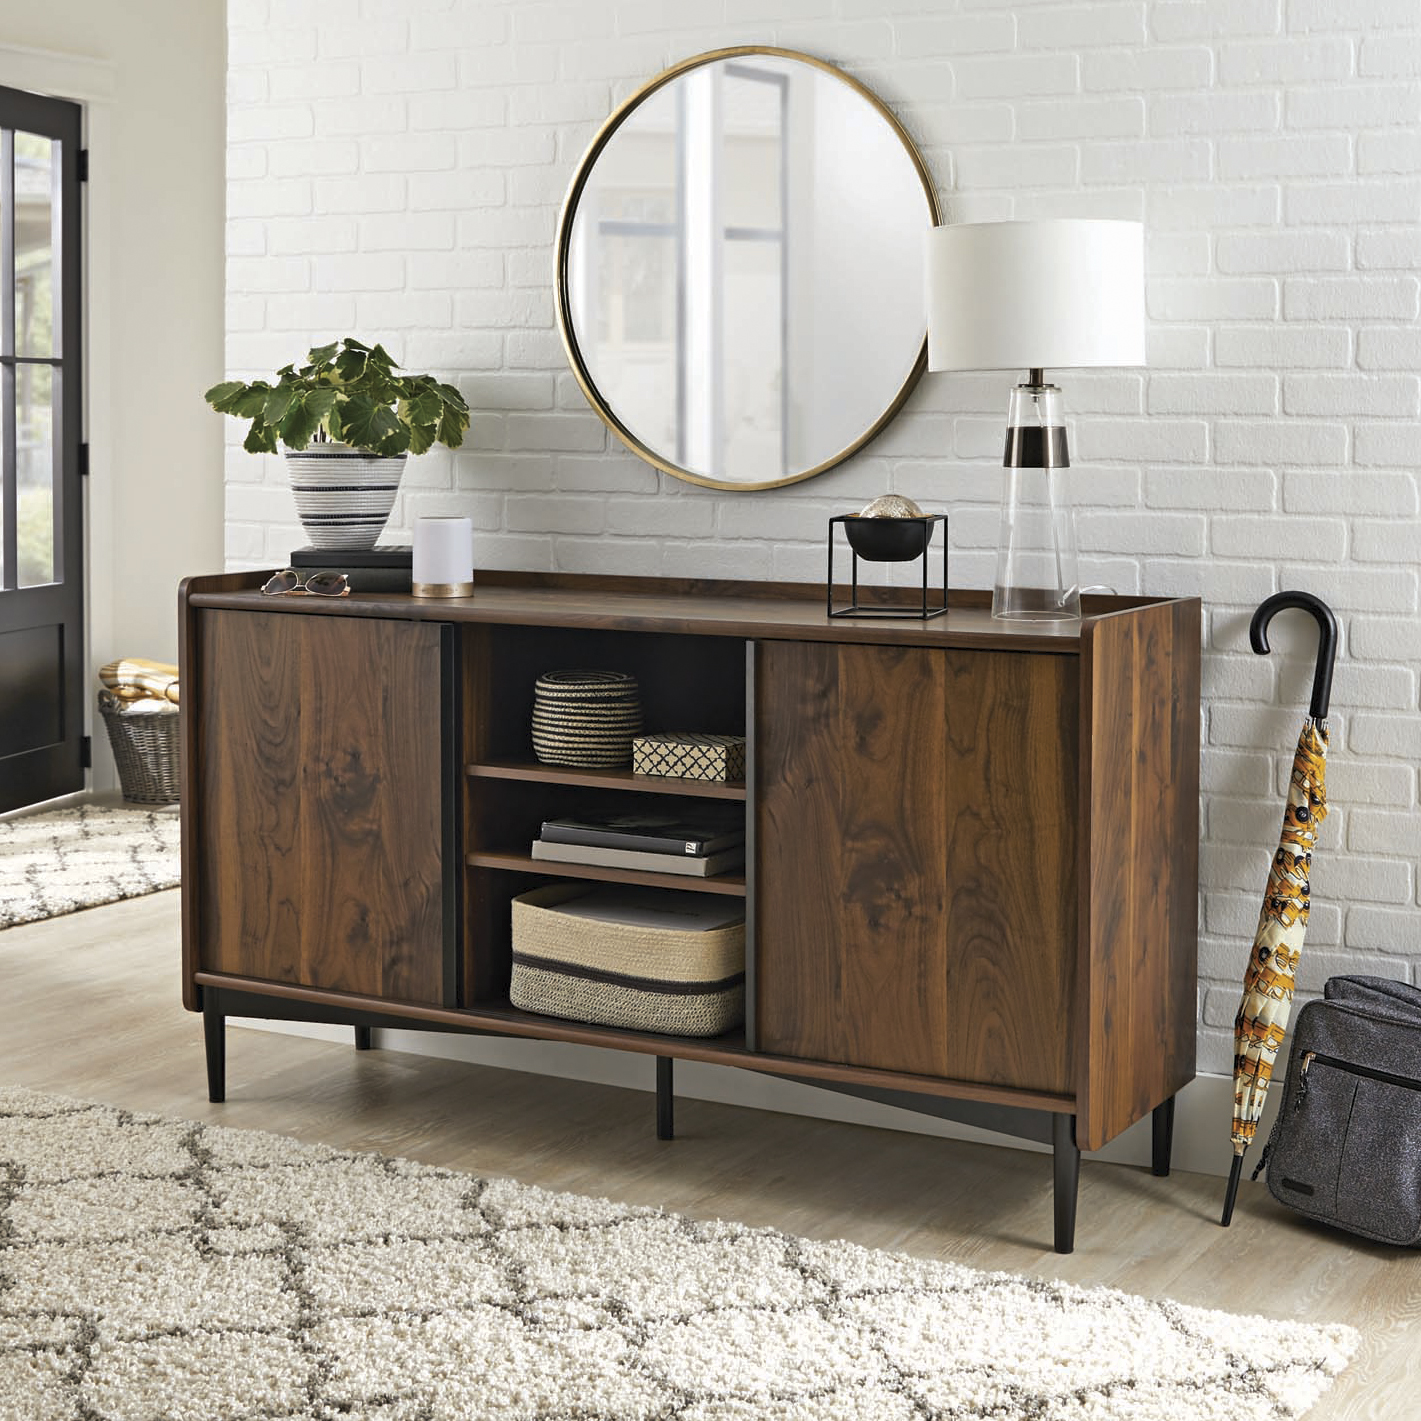 Better Homes & Gardens Montclair TV Stand Storage Console for TVs up to 65", Vintage Walnut Finish - image 3 of 7